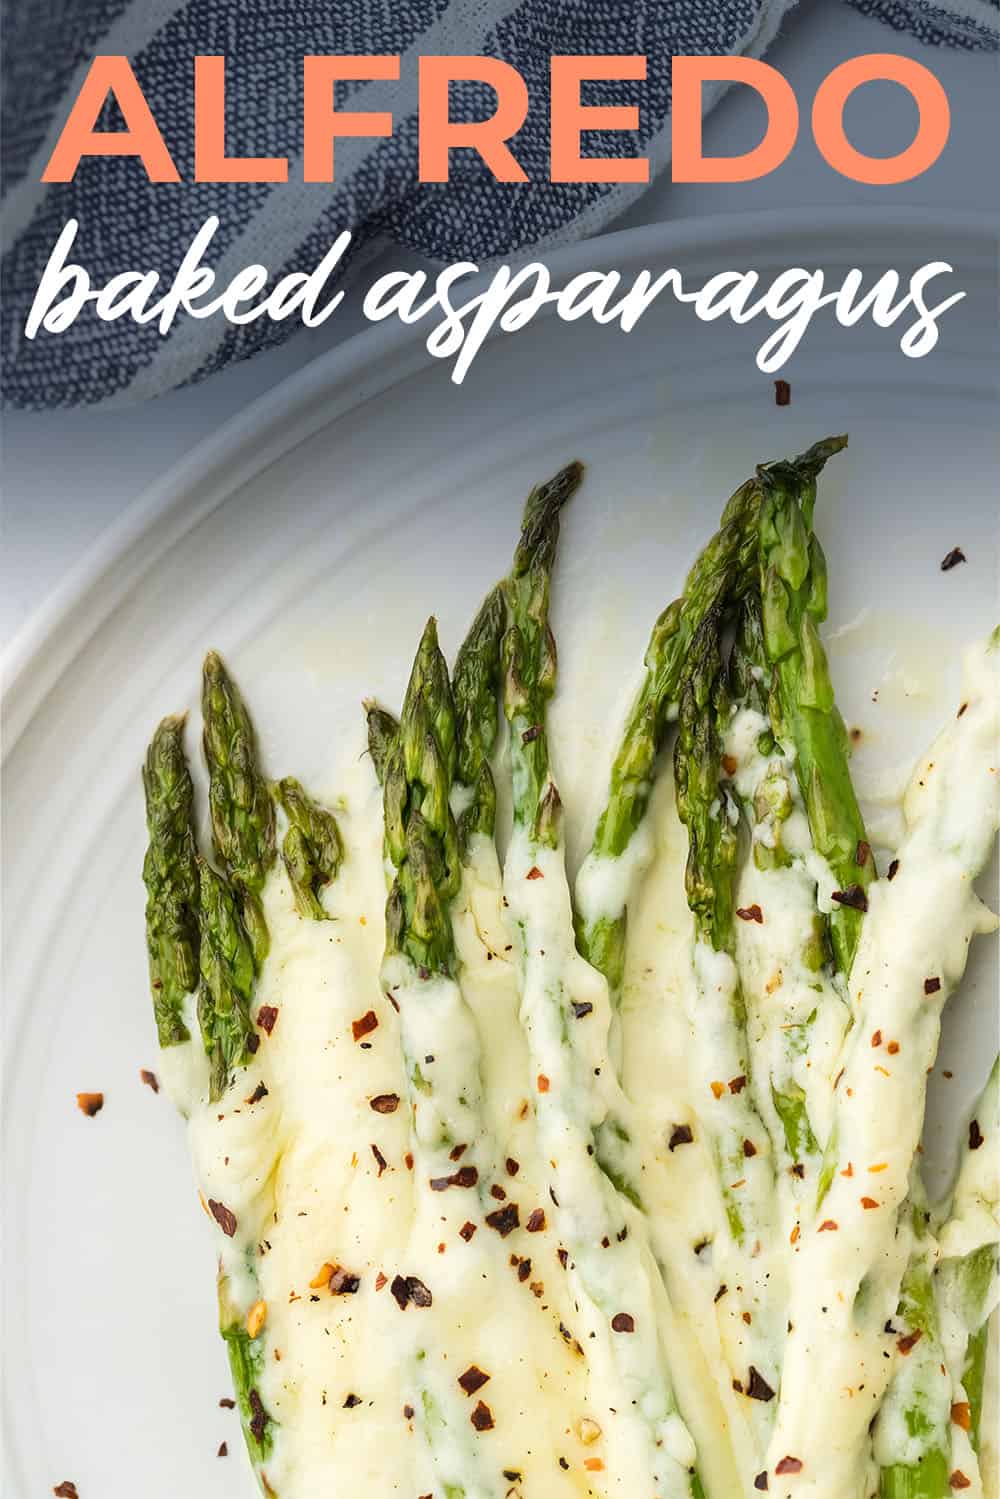 Asparagus on plate topped with alfredo sauce.